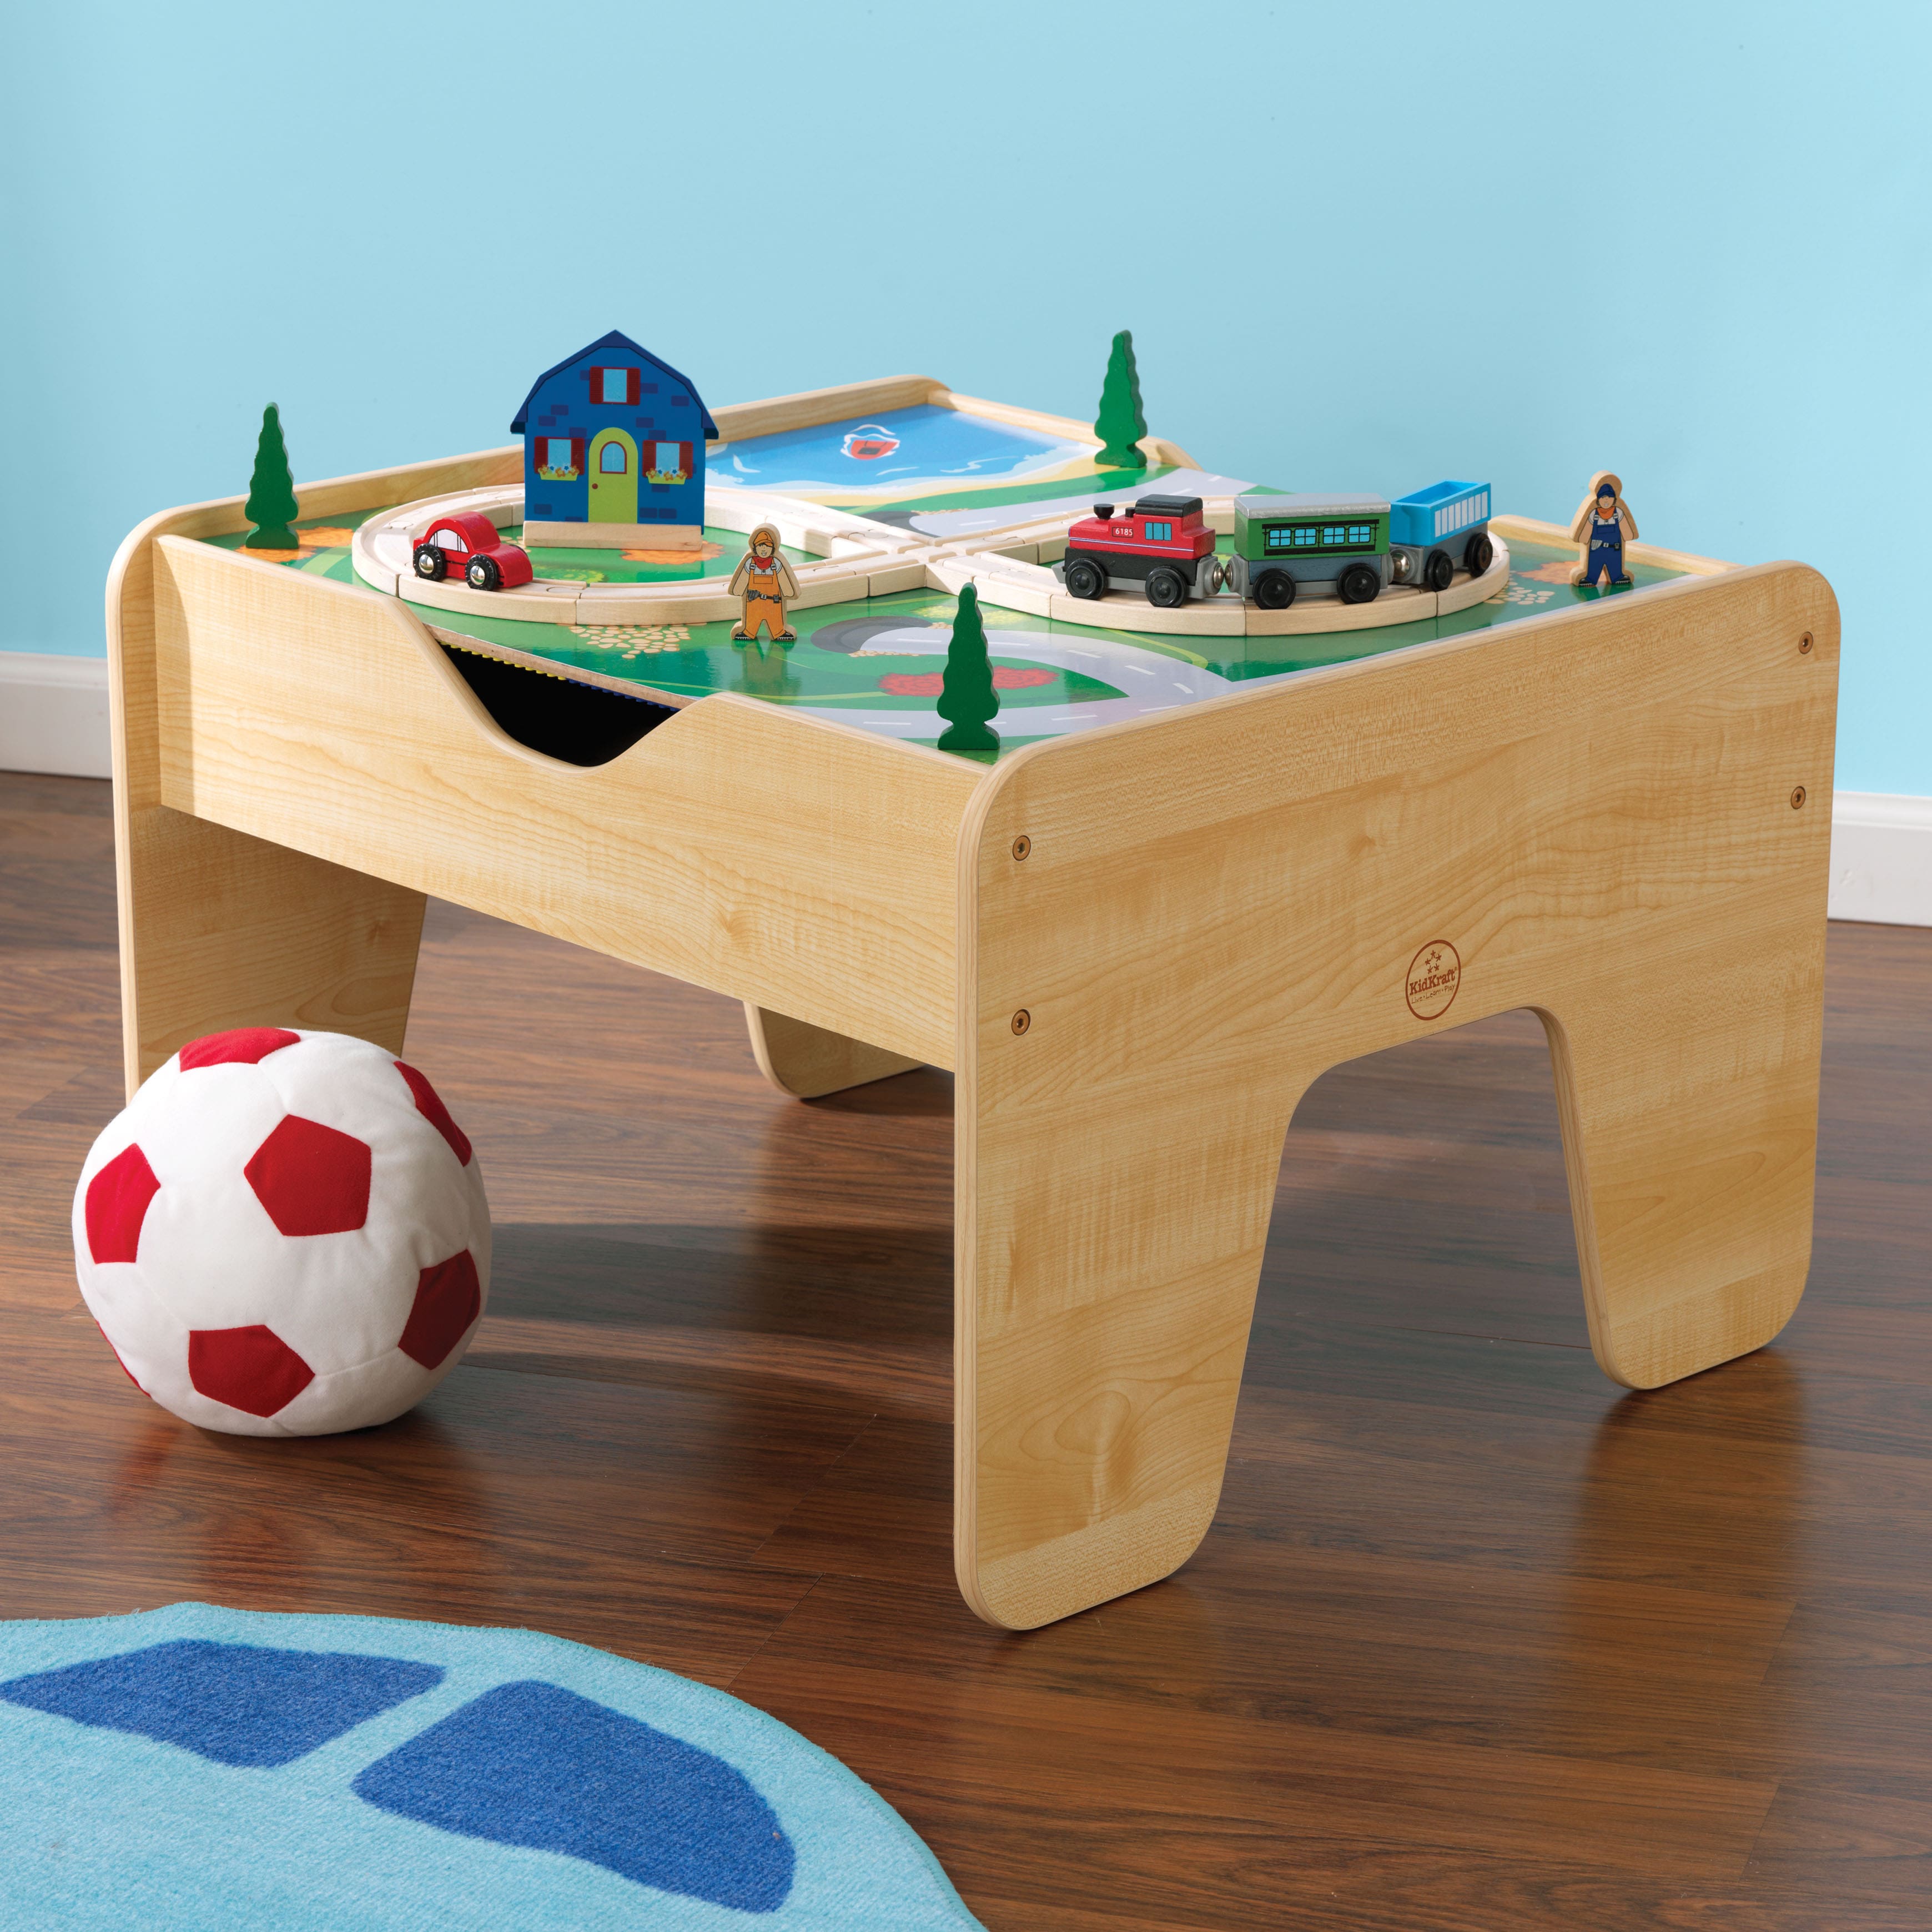 KidKraft 2 in 1 Activity Table with Board